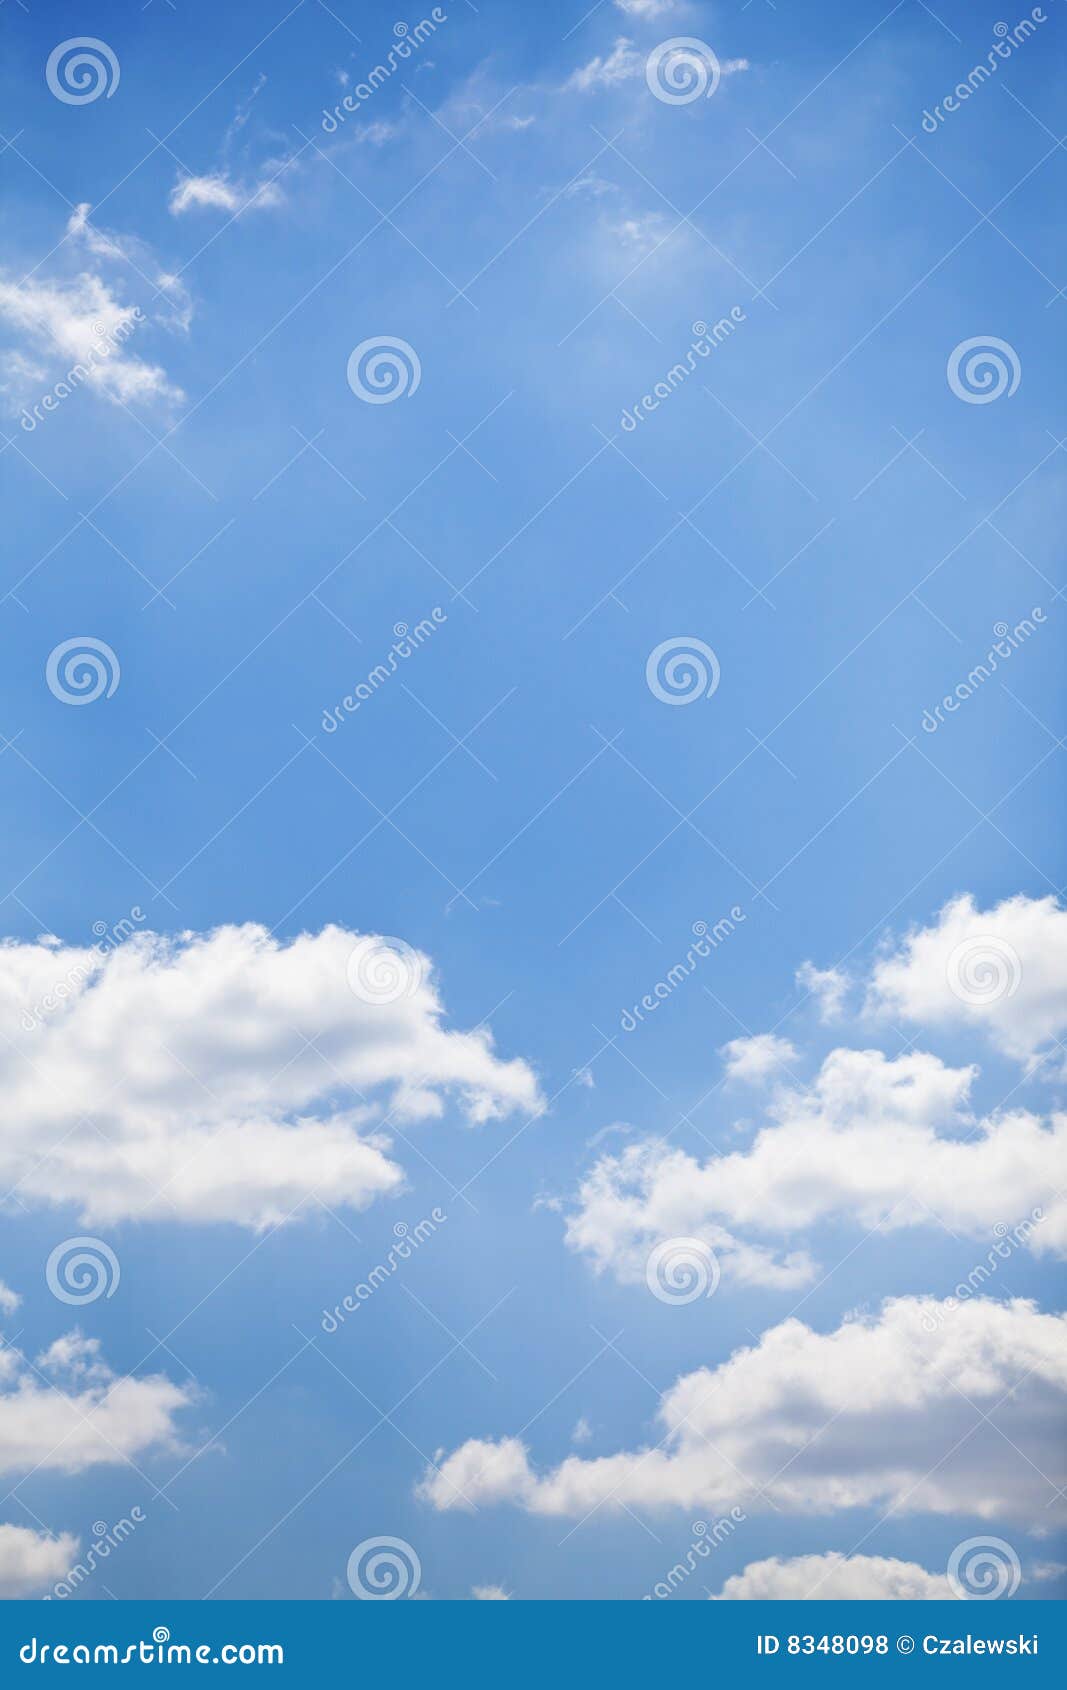 Blue Sky with White Fluffy Clouds Background Stock Photo - Image of ...